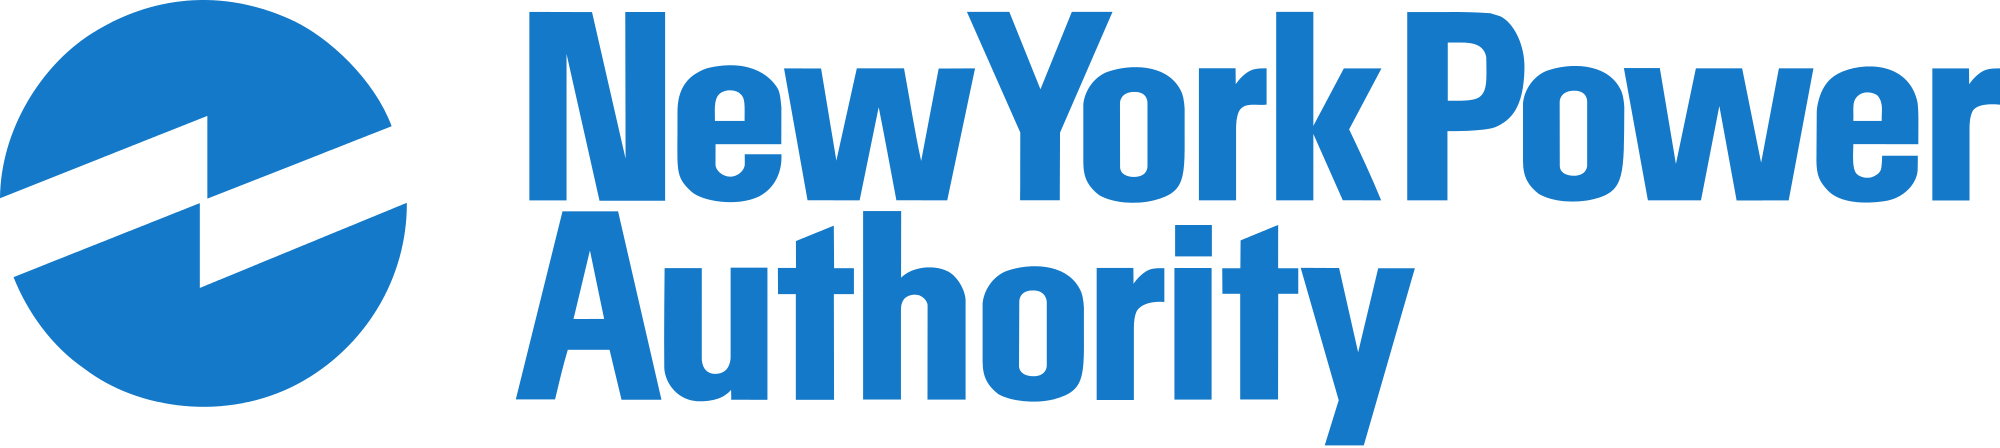 New_York_Power_Authority.svg.png